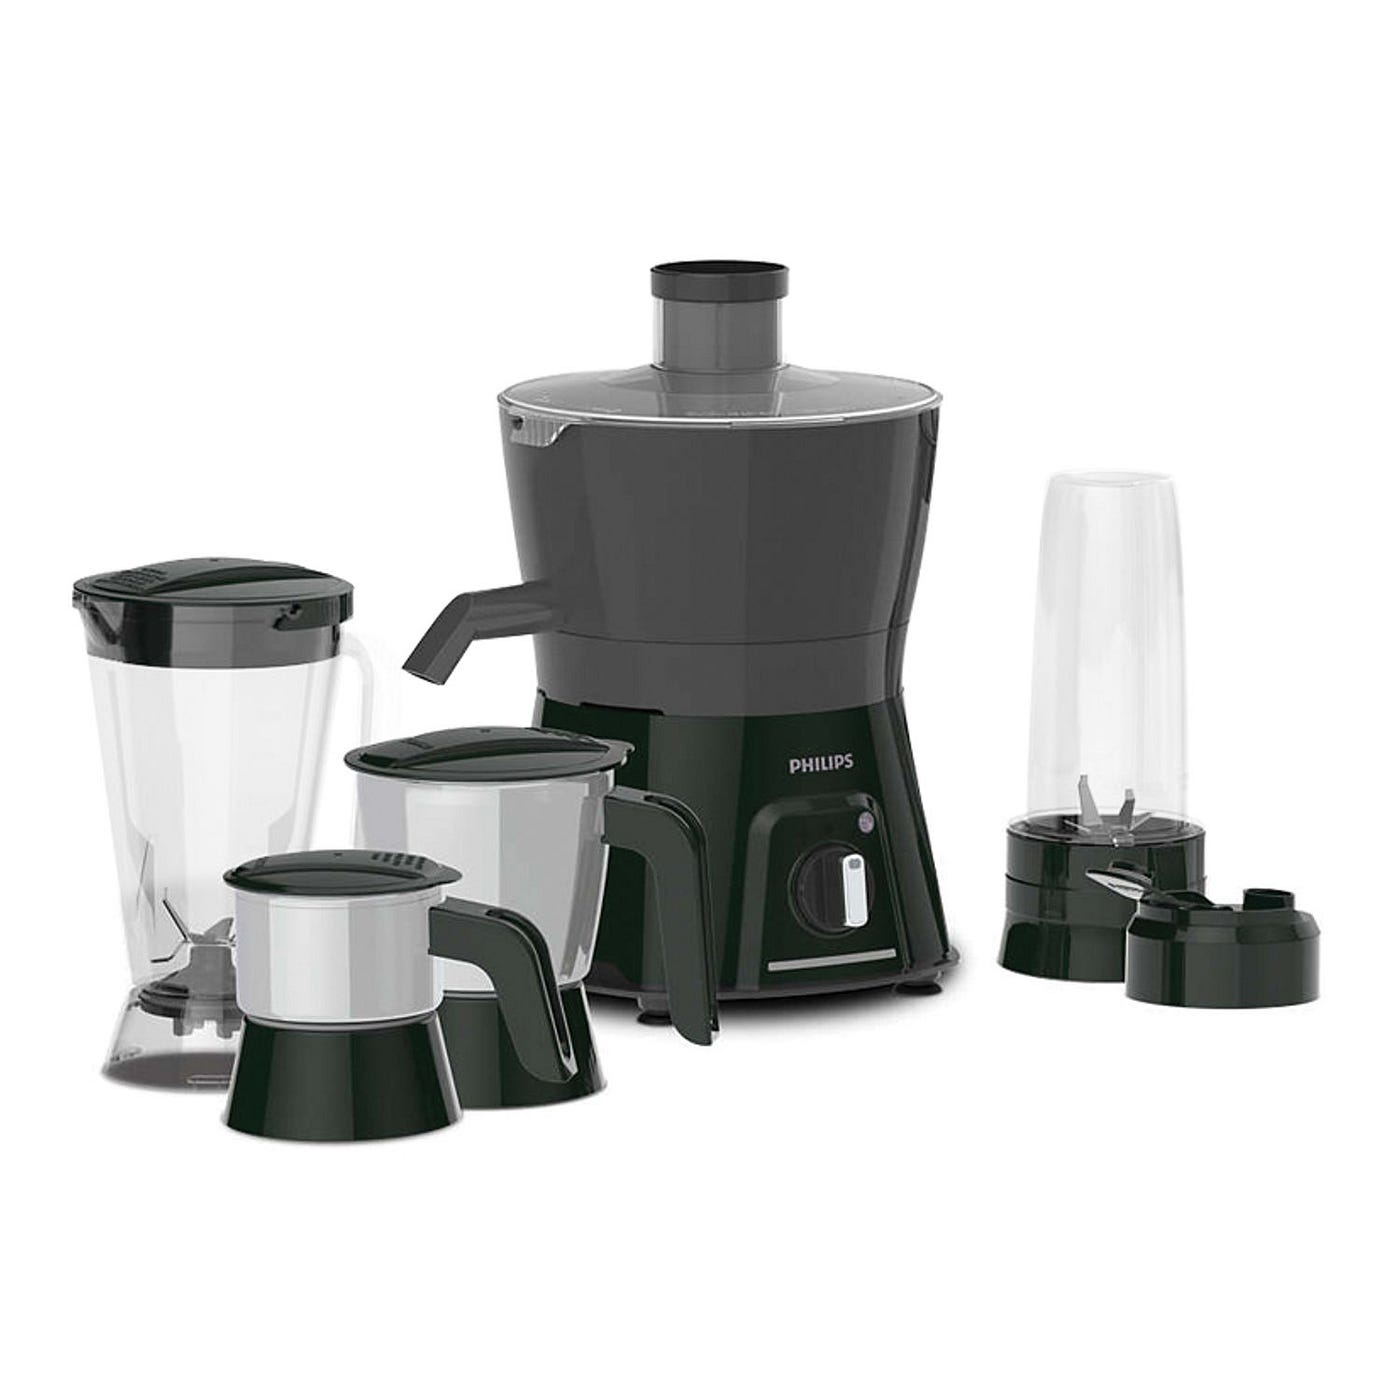 Buy Juicer Mixer Grinders from Philips - Electrical Appliances - Medium